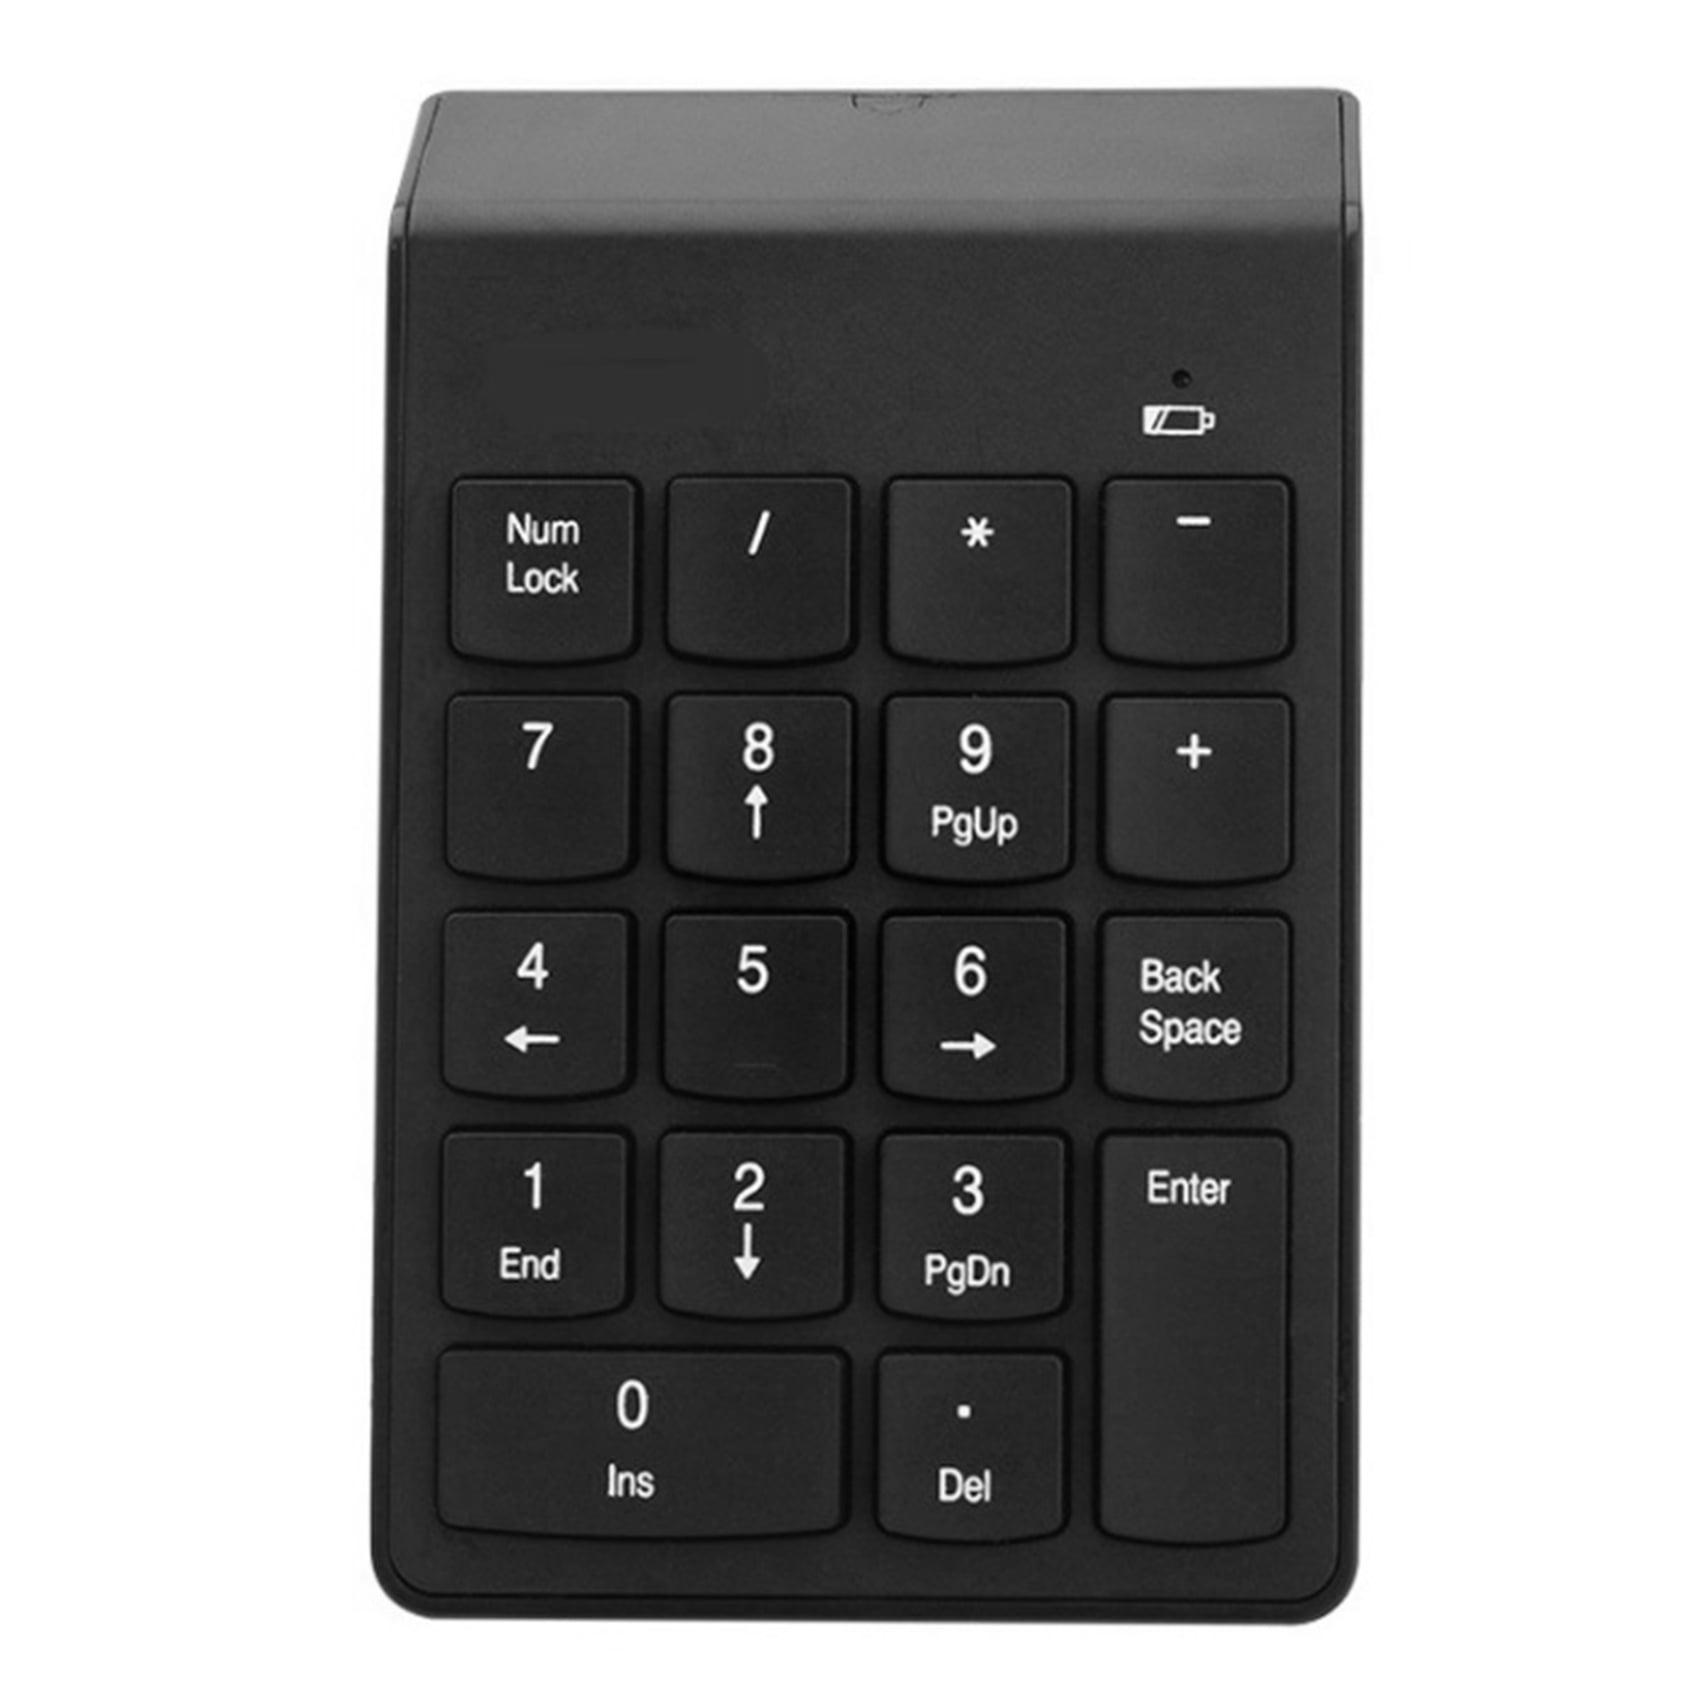 ASHATA 2.4G Wireless Keypad Portable Number Keyboard with LCD Display,Number Keypad Wireless for Microsoft/Android/iMac